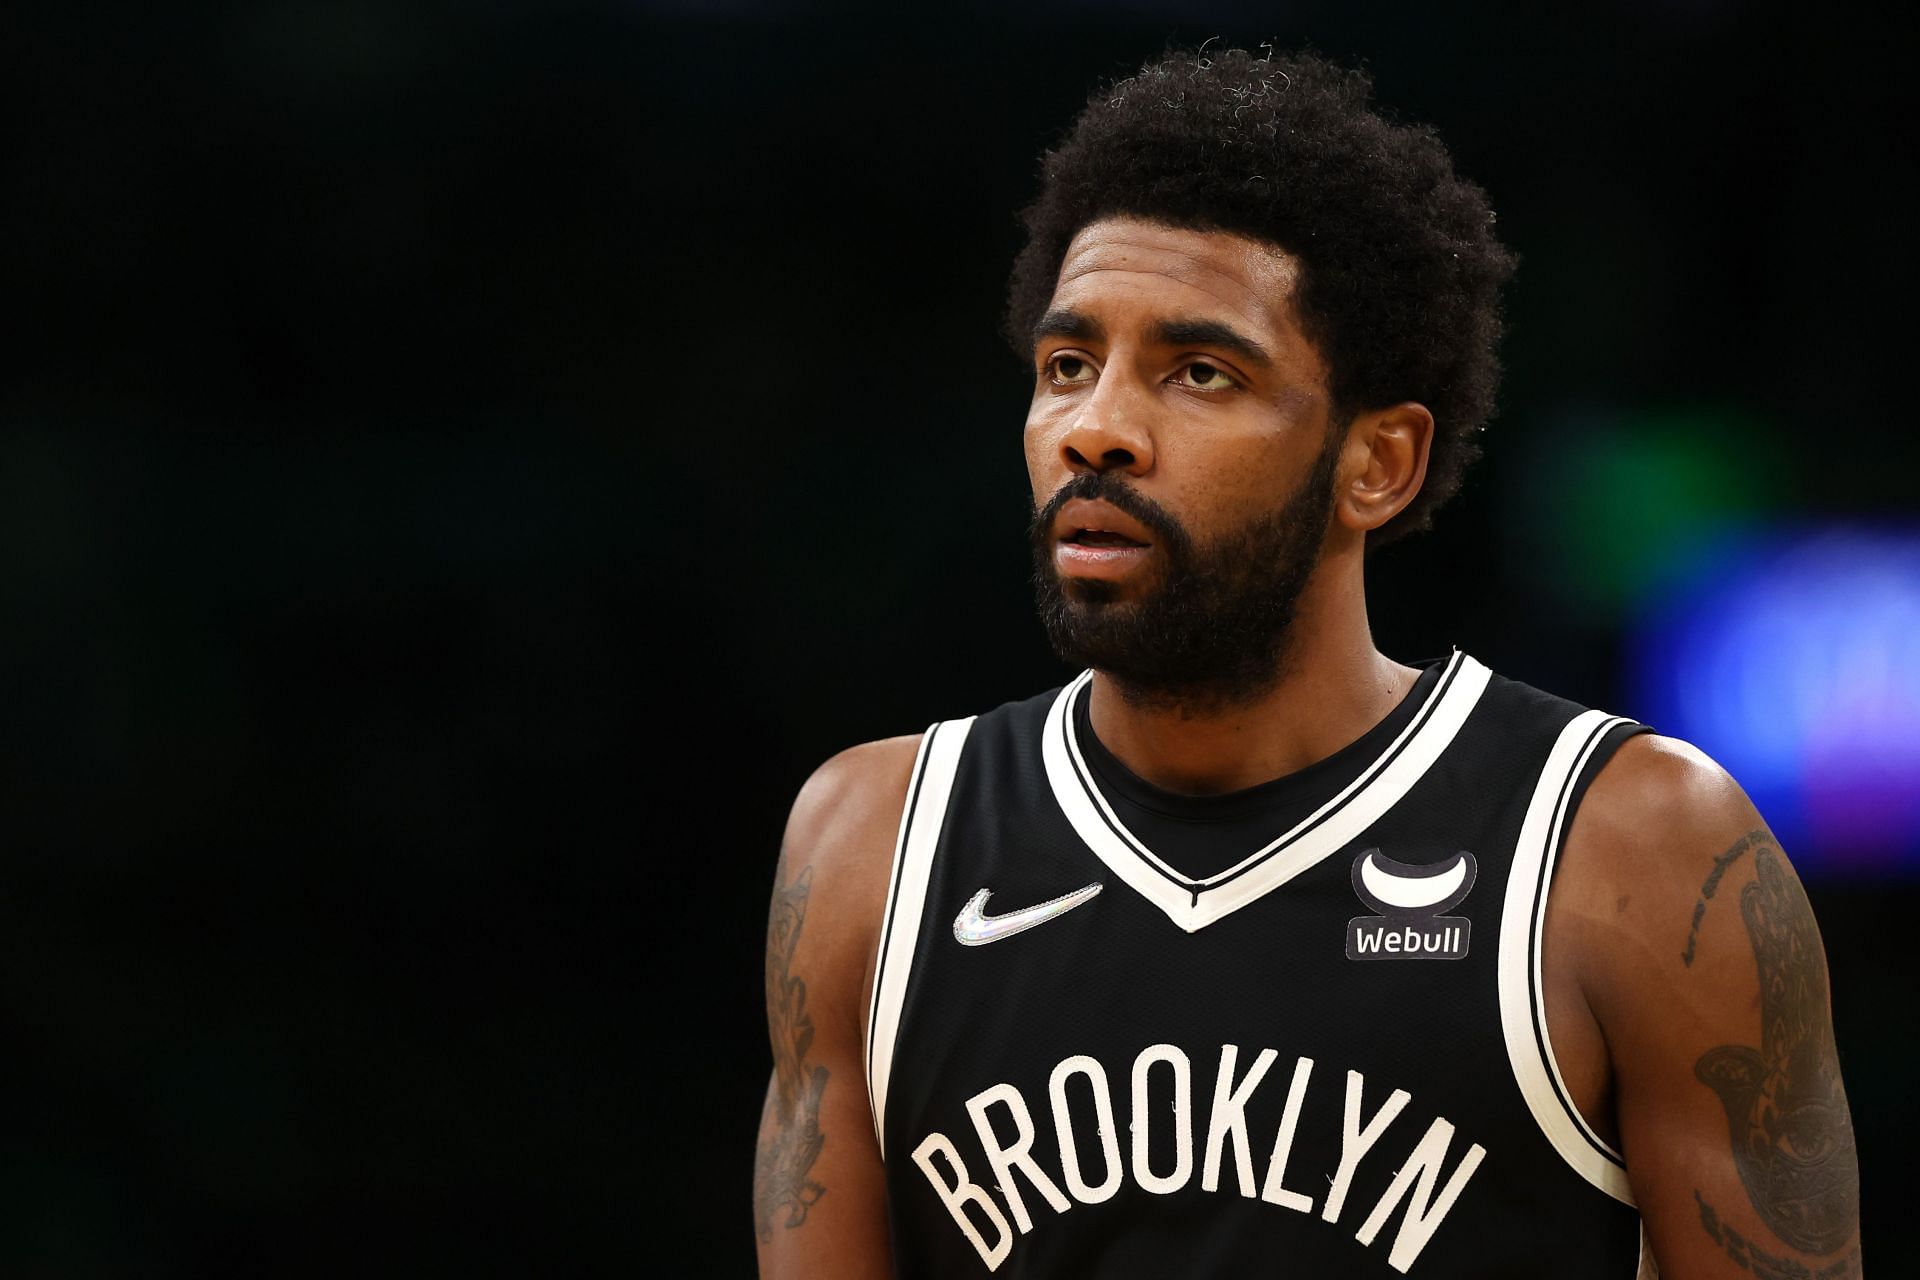 Some teams may still be reluctant to give Kyrie Irving a max long-term deal even if he plays well next season.